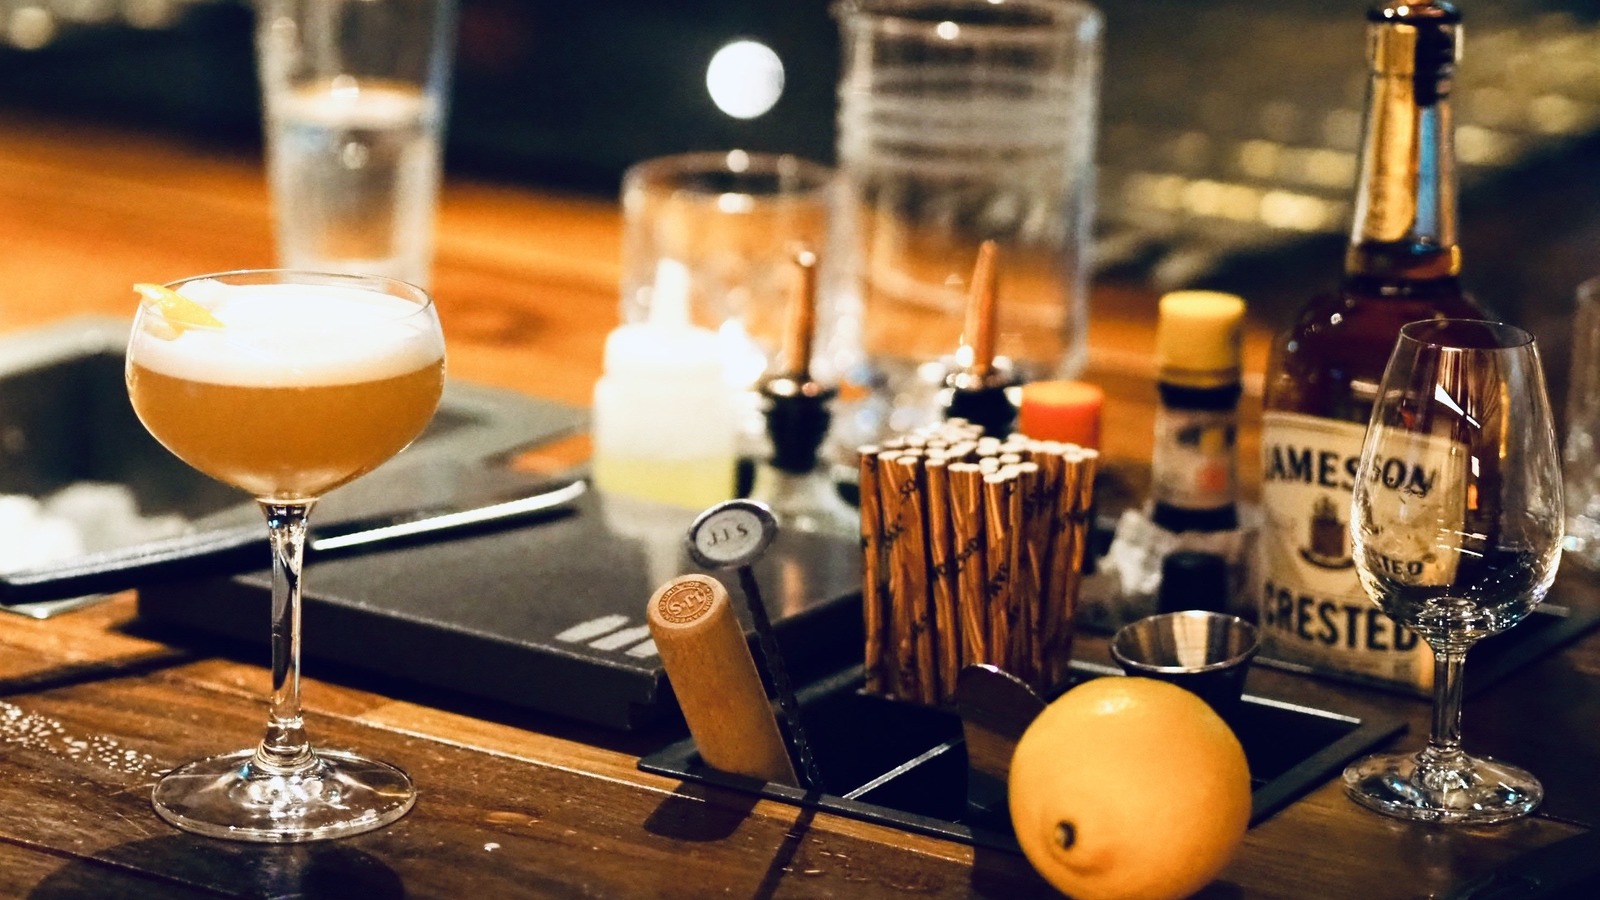 https://www.mashed.com/img/gallery/essential-drinks-every-home-bartender-needs-in-their-bar/l-intro-1655910433.jpg